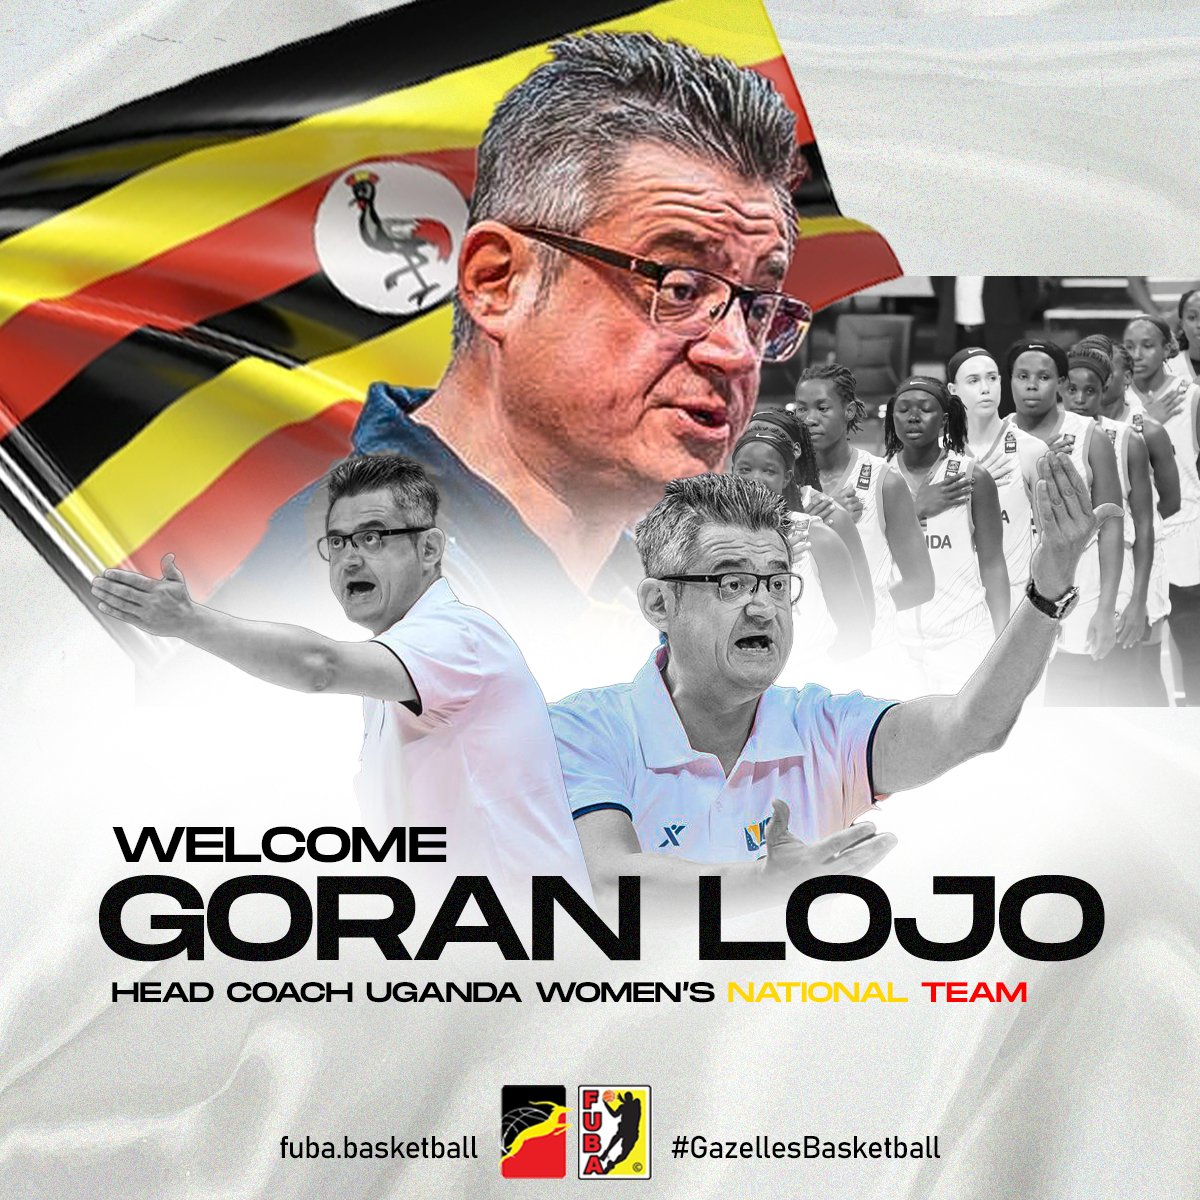 📢 We're thrilled to announce the acquisition of Bosnian Goran Lojo as our new Gazelles Head Coach. Welcome to the team, Coach Lojo! 🎉🏀 #GazellesBasketball